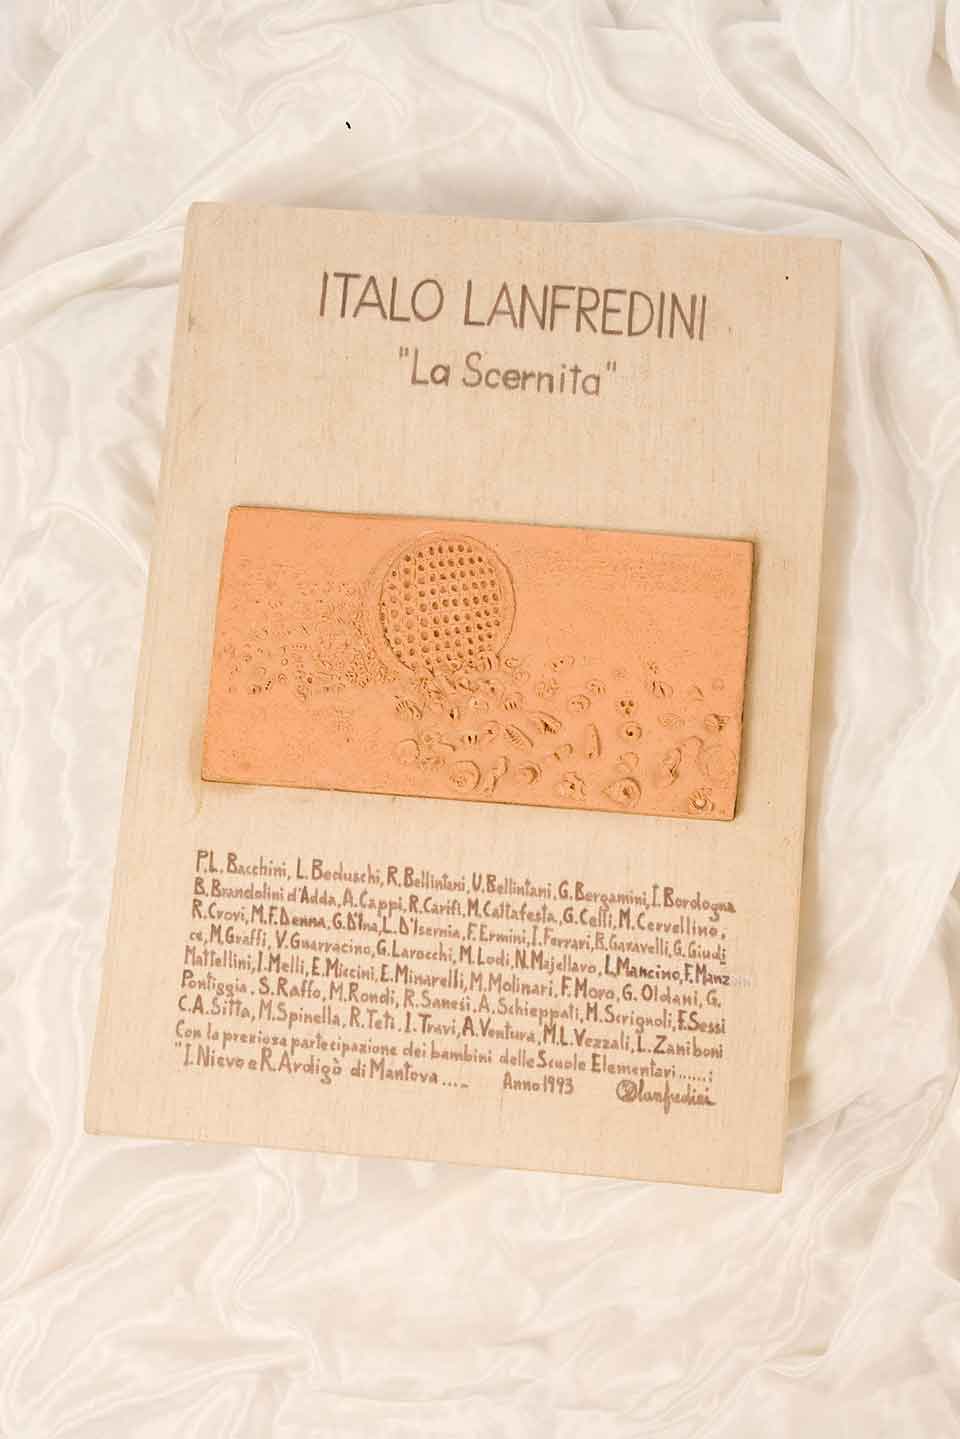 A photograph of a book's page. The text is in Italian